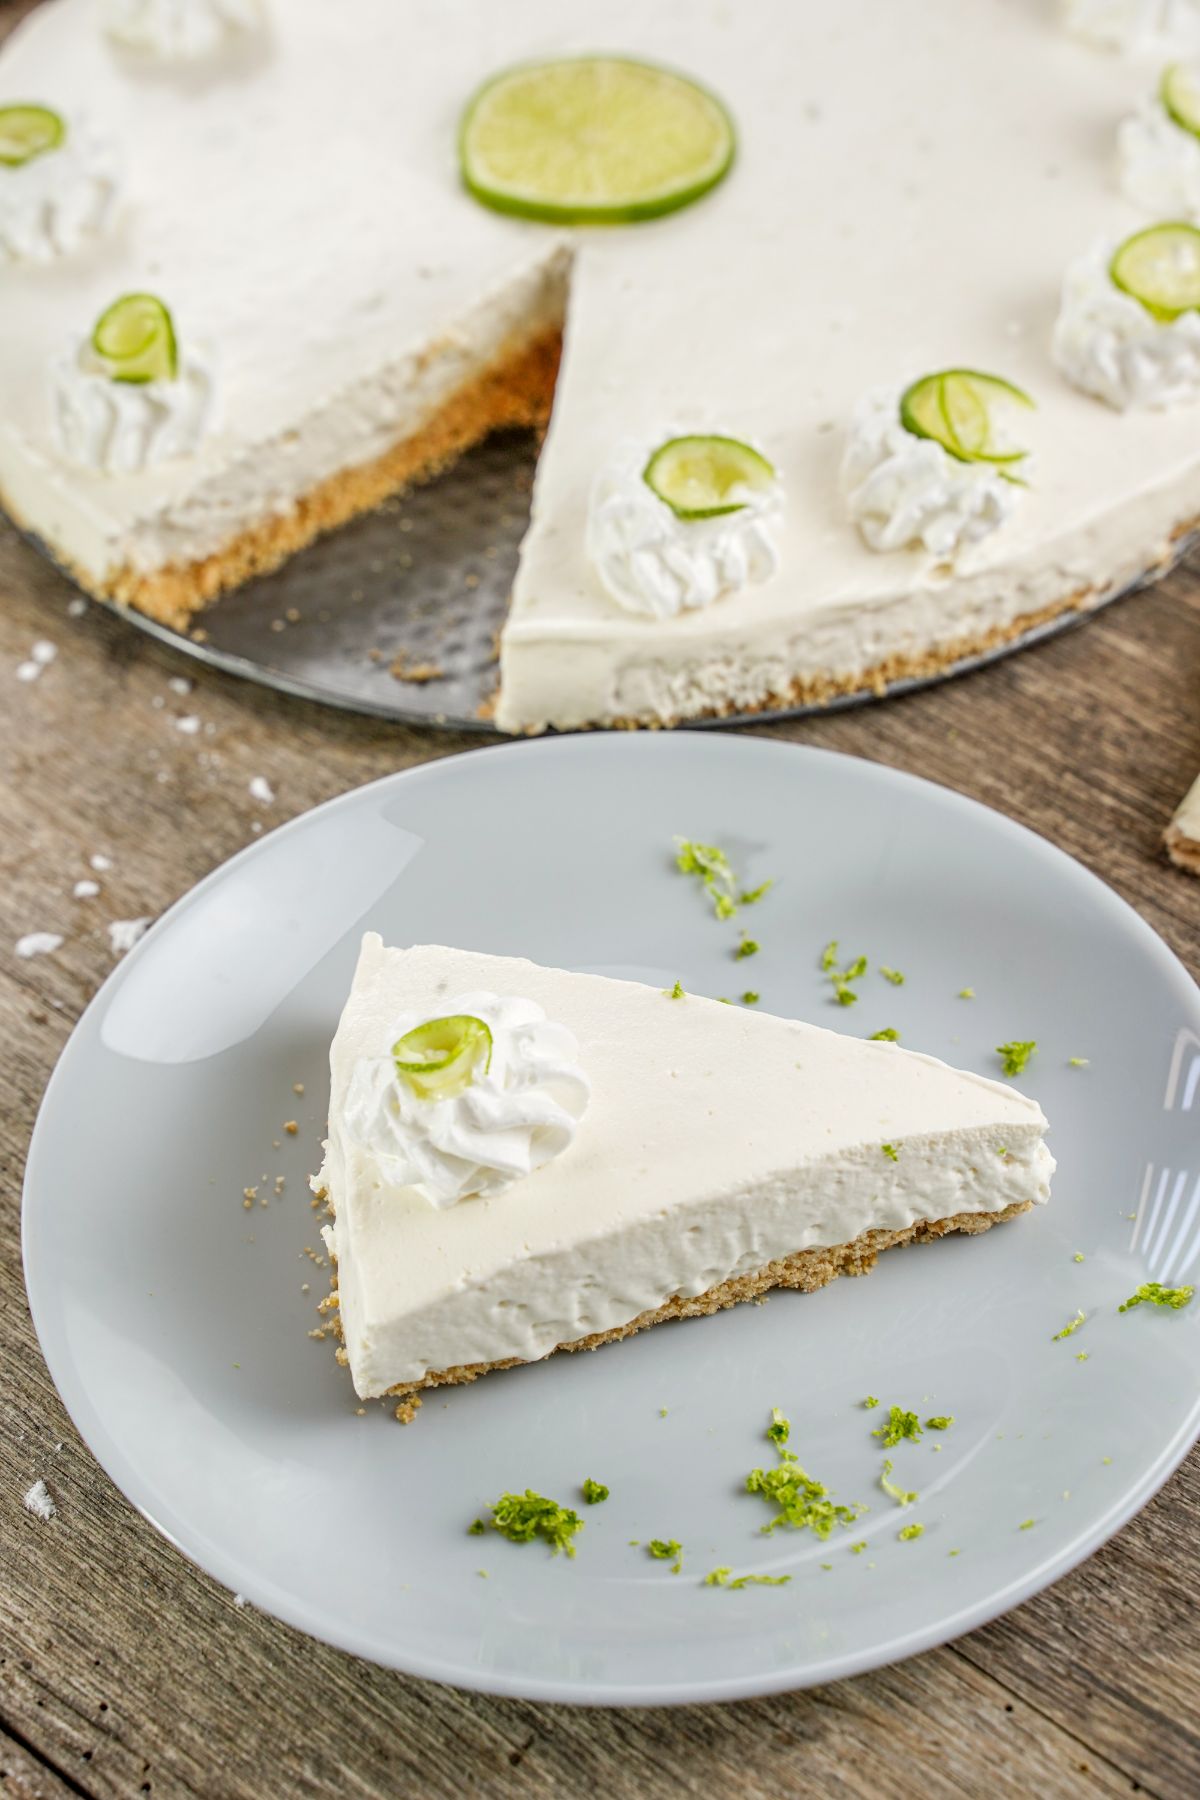 slice of lime tart on light blue plate next to whole pie